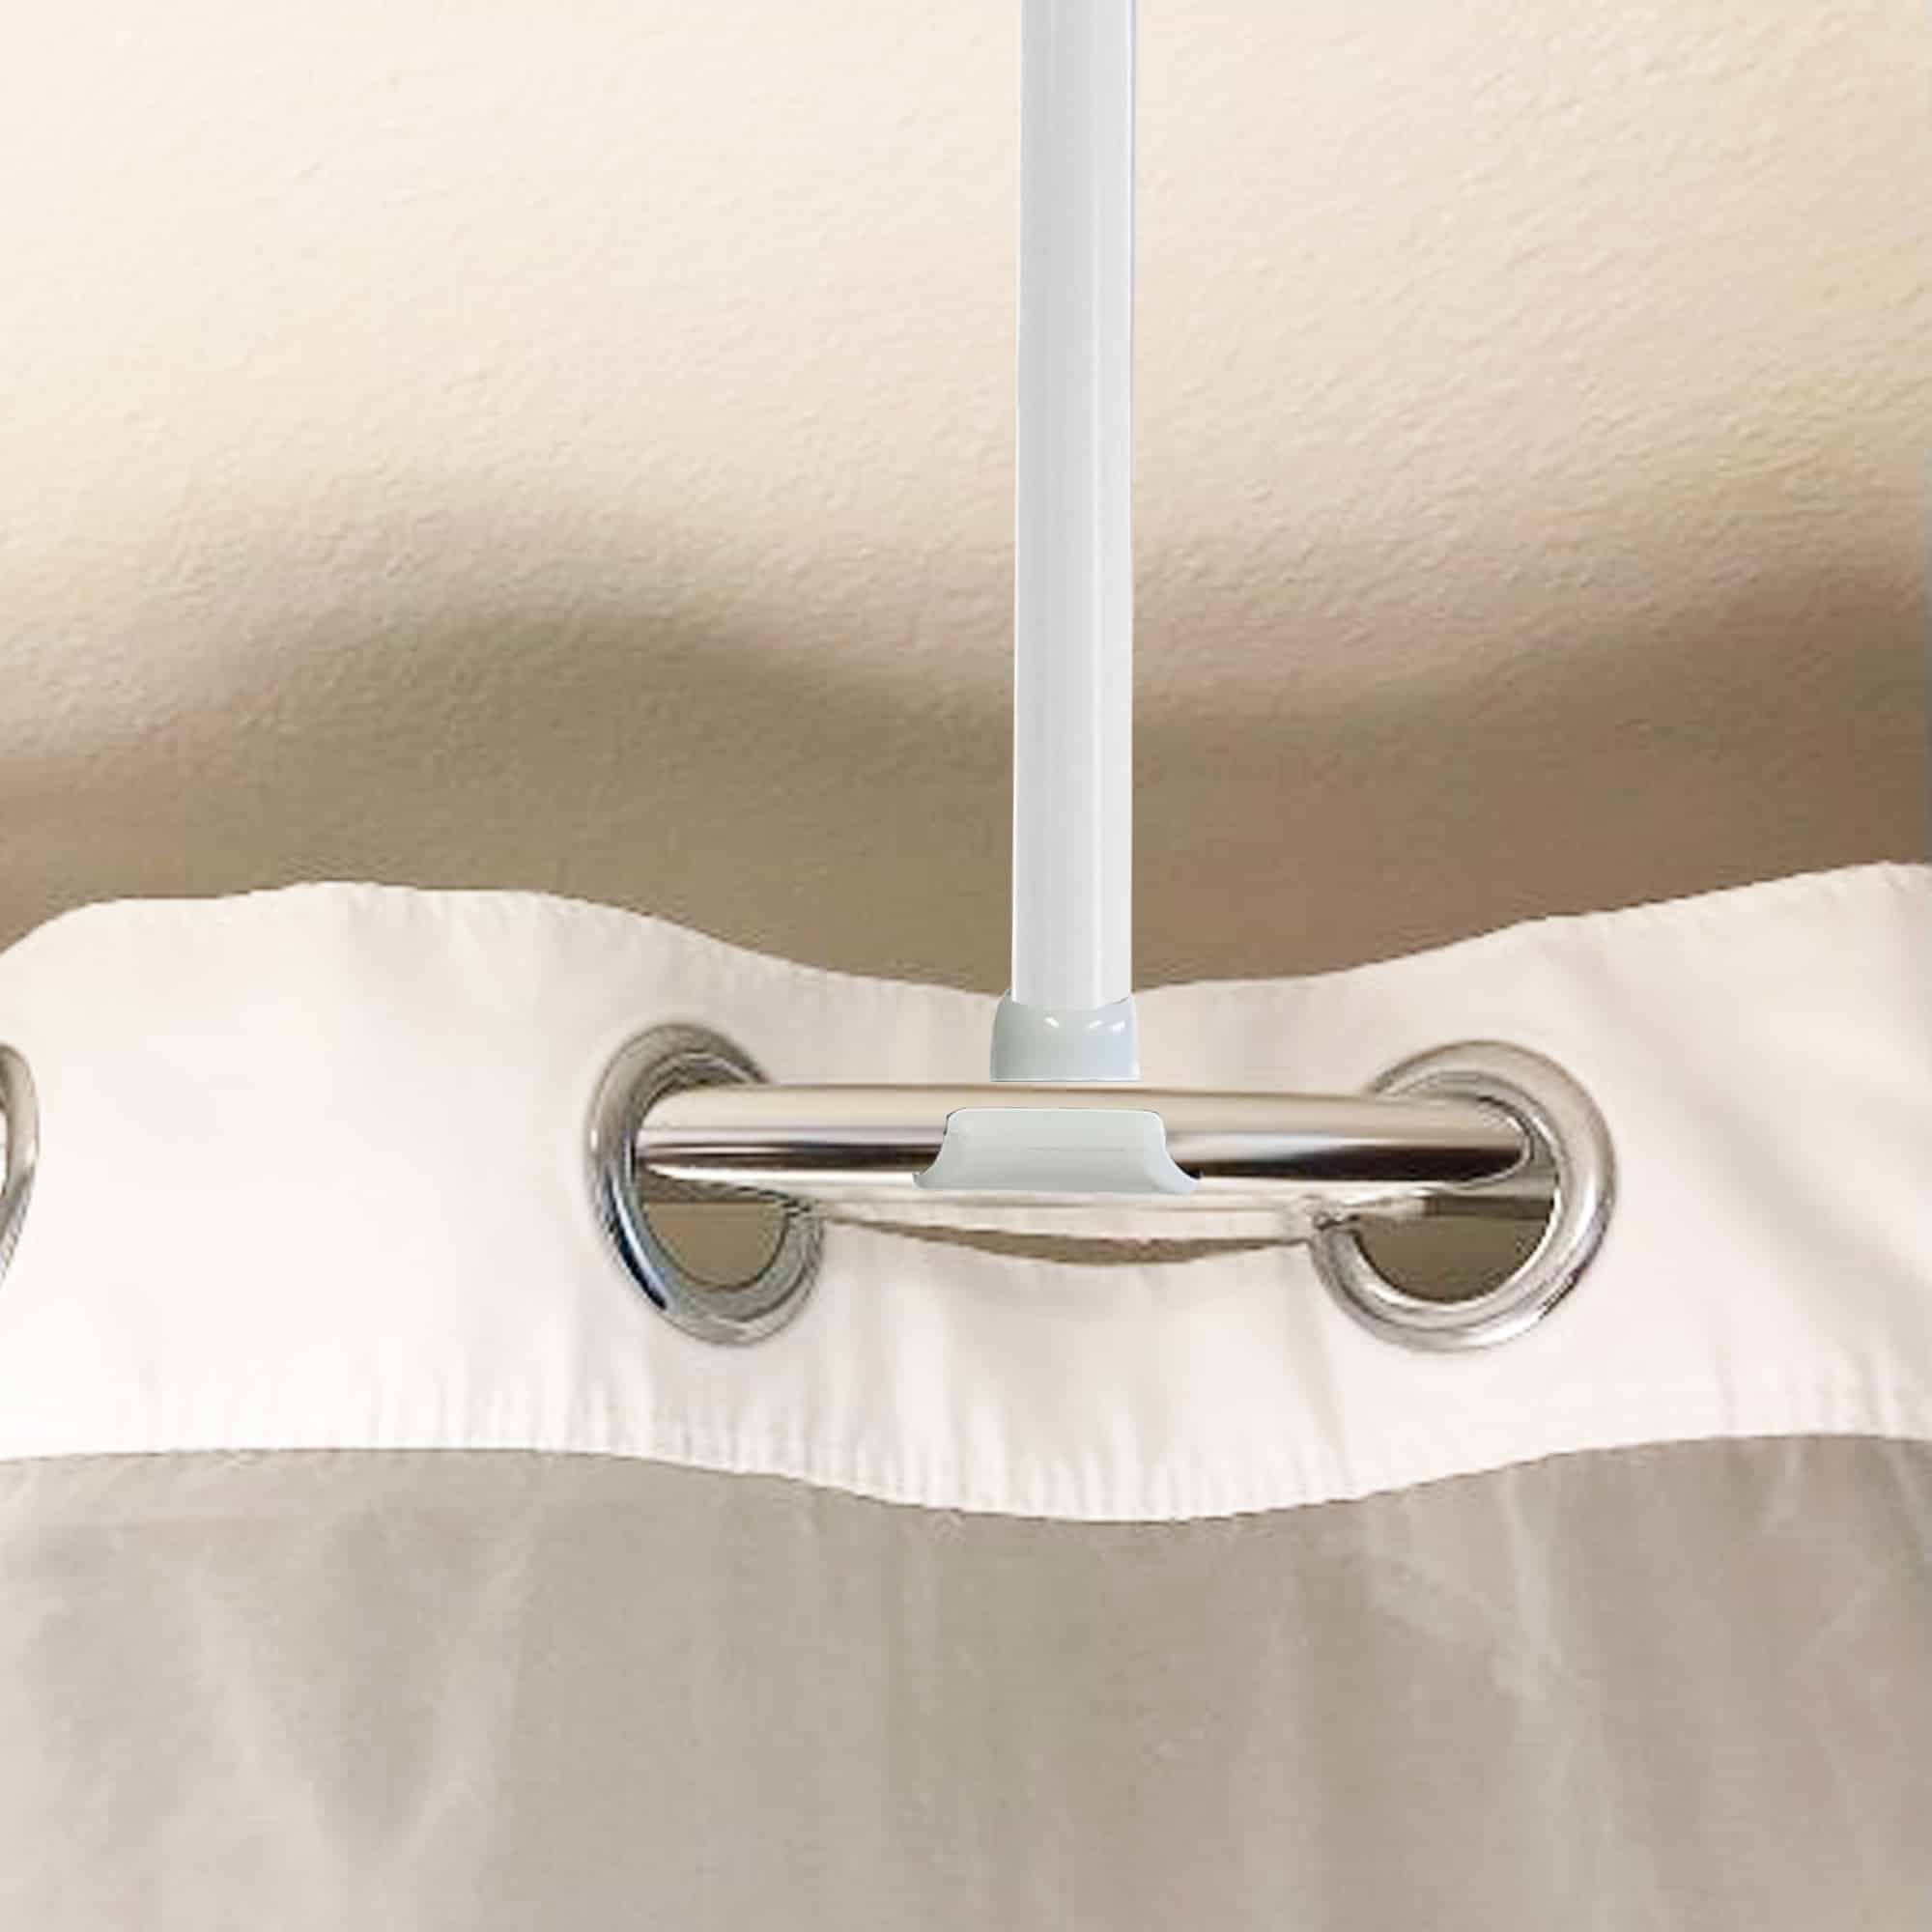 Detail of white ceiling support rod for shower curtain rail with secure clip-on attachment